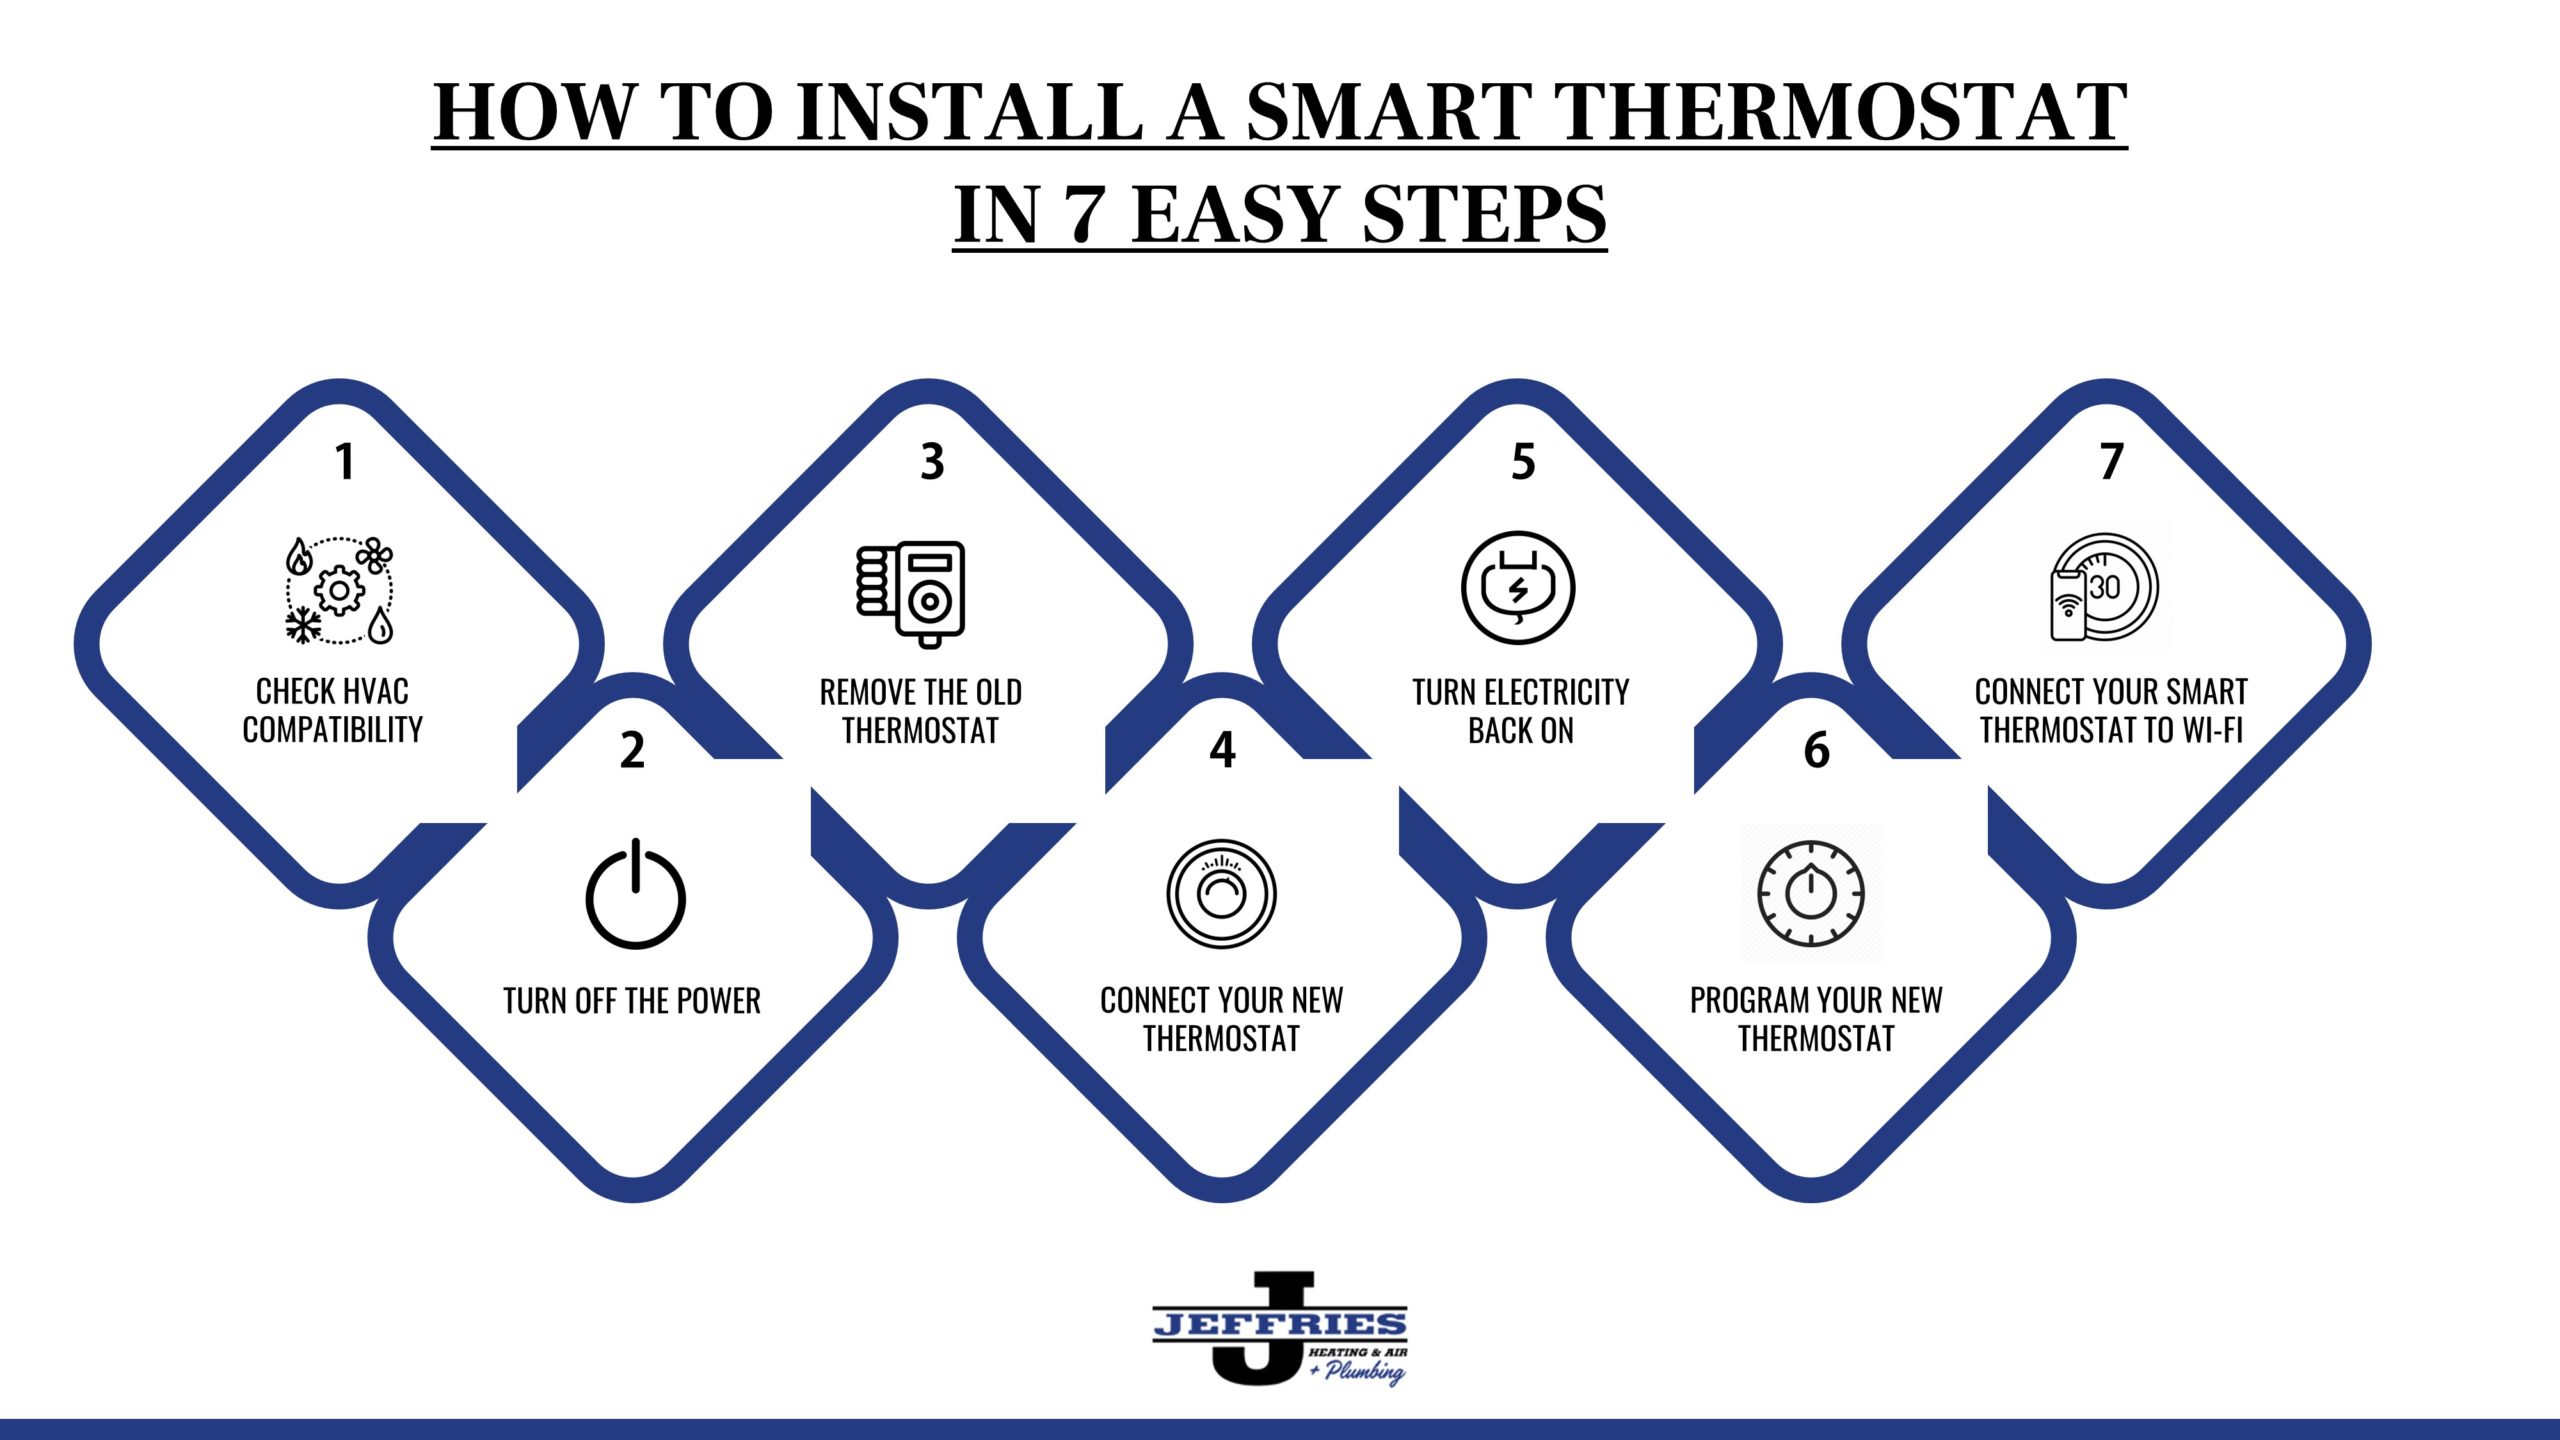 How to install a smart thermostat in 7 steps infographic